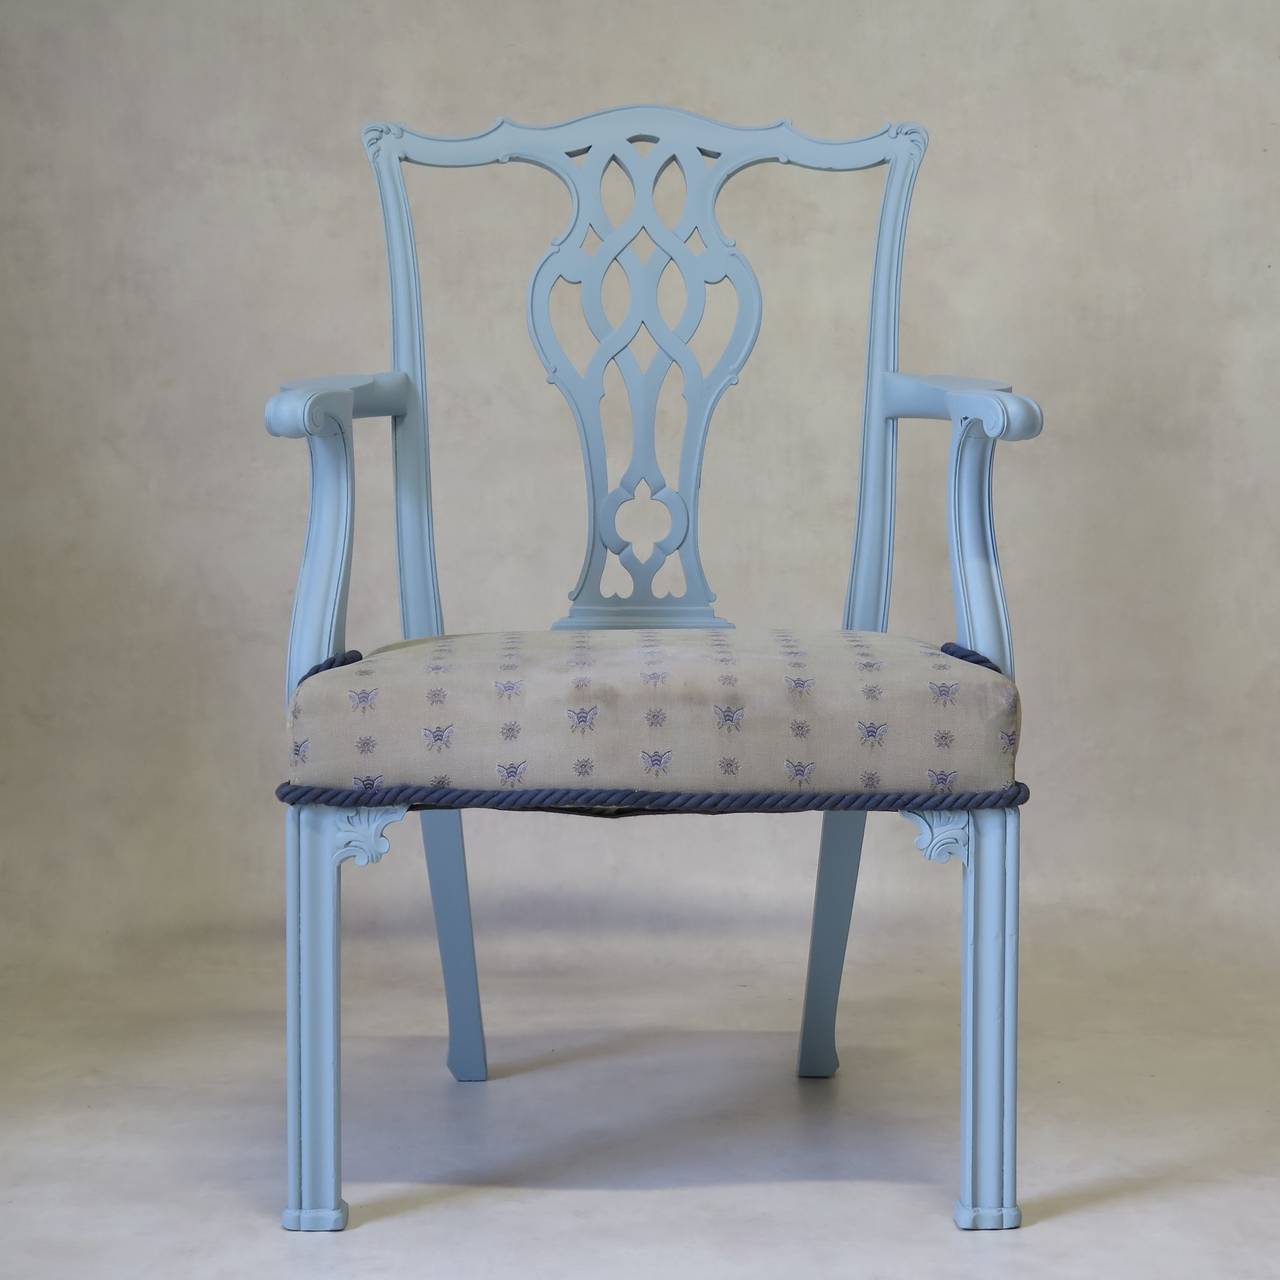 Set of six Chippendale-style side chairs and two carvers with wide, comfortable seats upholstered in off-white fabric with blue bee-motif. The serpentine-front seats are underlined with a large blue cord. Lattice-work back slats. The wood structure